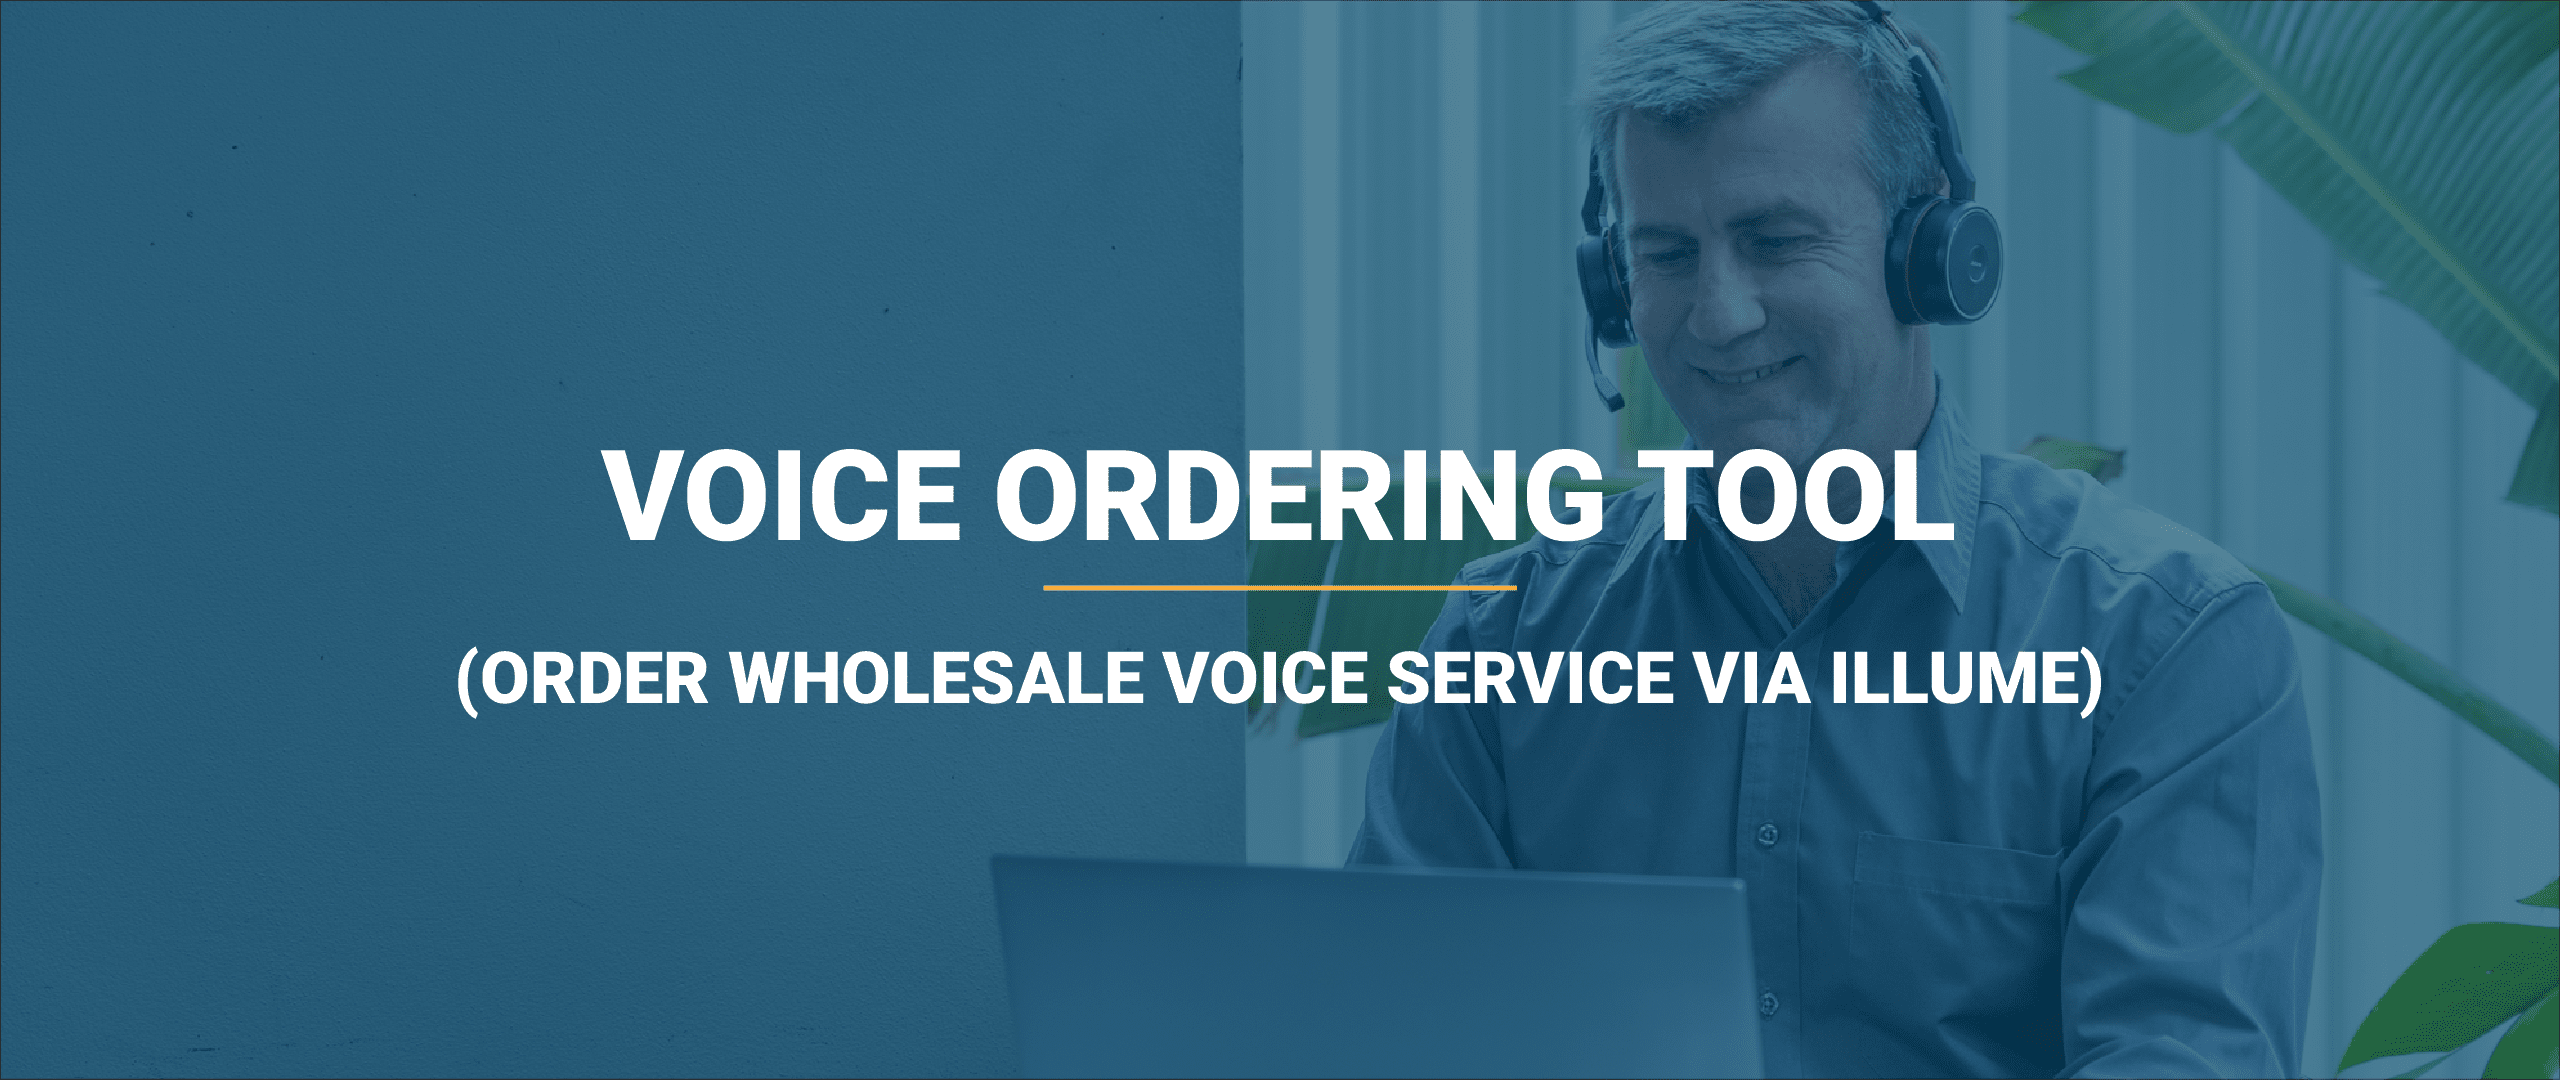 Voice ordering tool